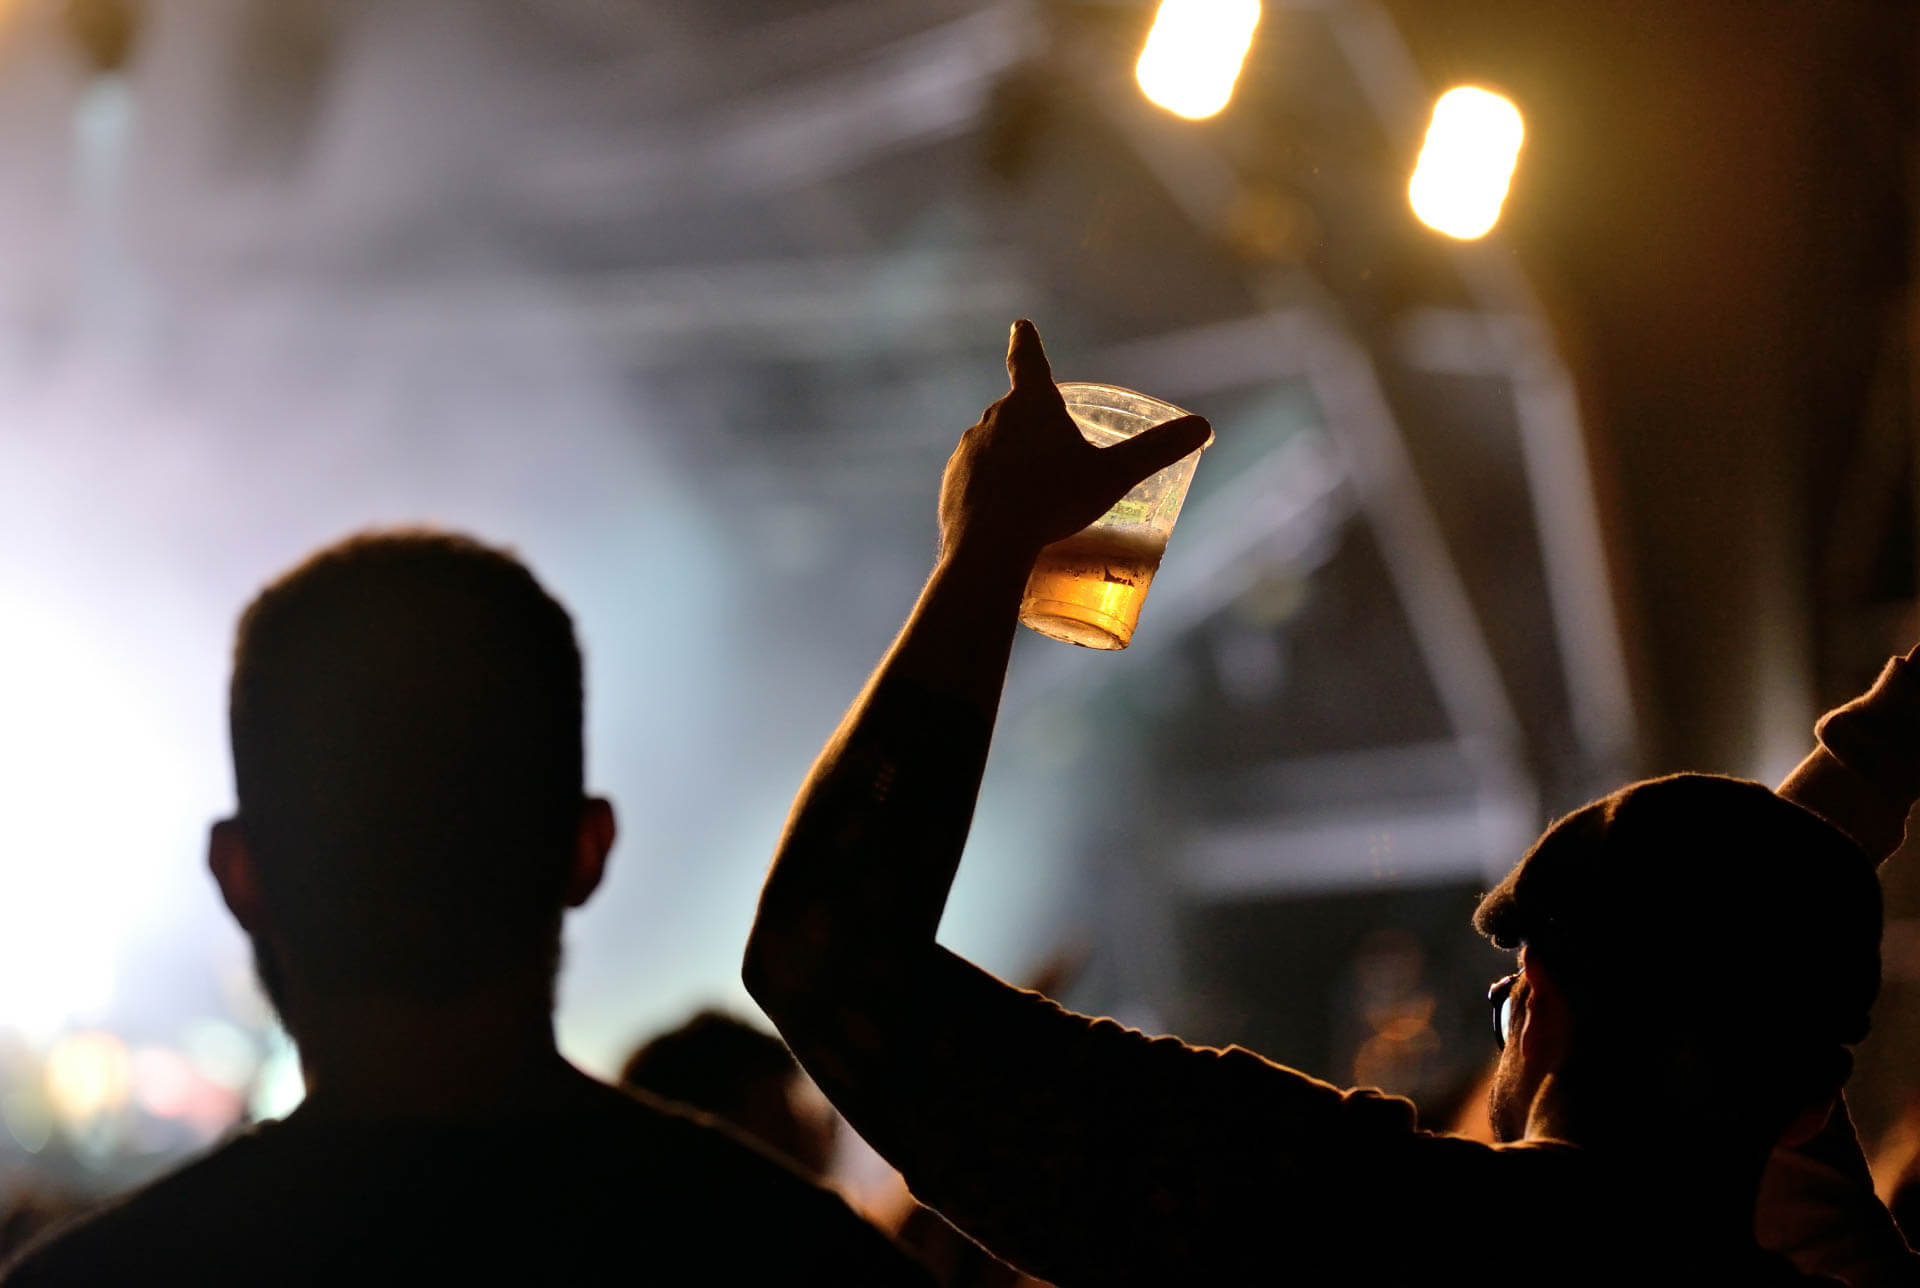 guest watching concert and holding a drink